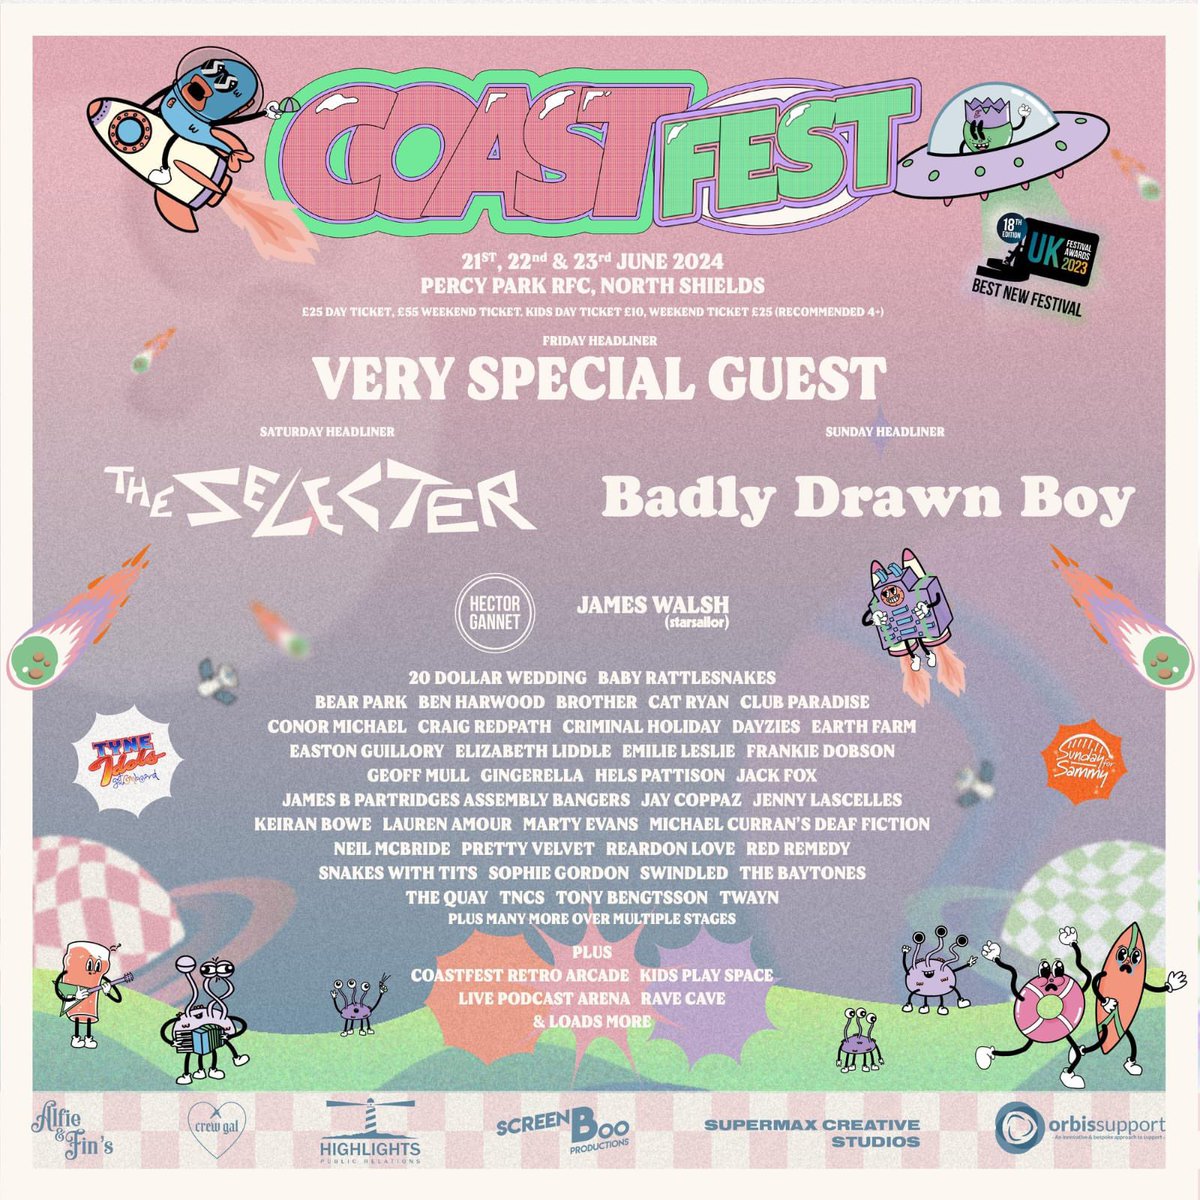 Excited to announce our first summer festival of the year! We’ll be playing at Coast Fest on Sat 22nd June. Get some tickets and come along! skiddle.com/festivals/coas…